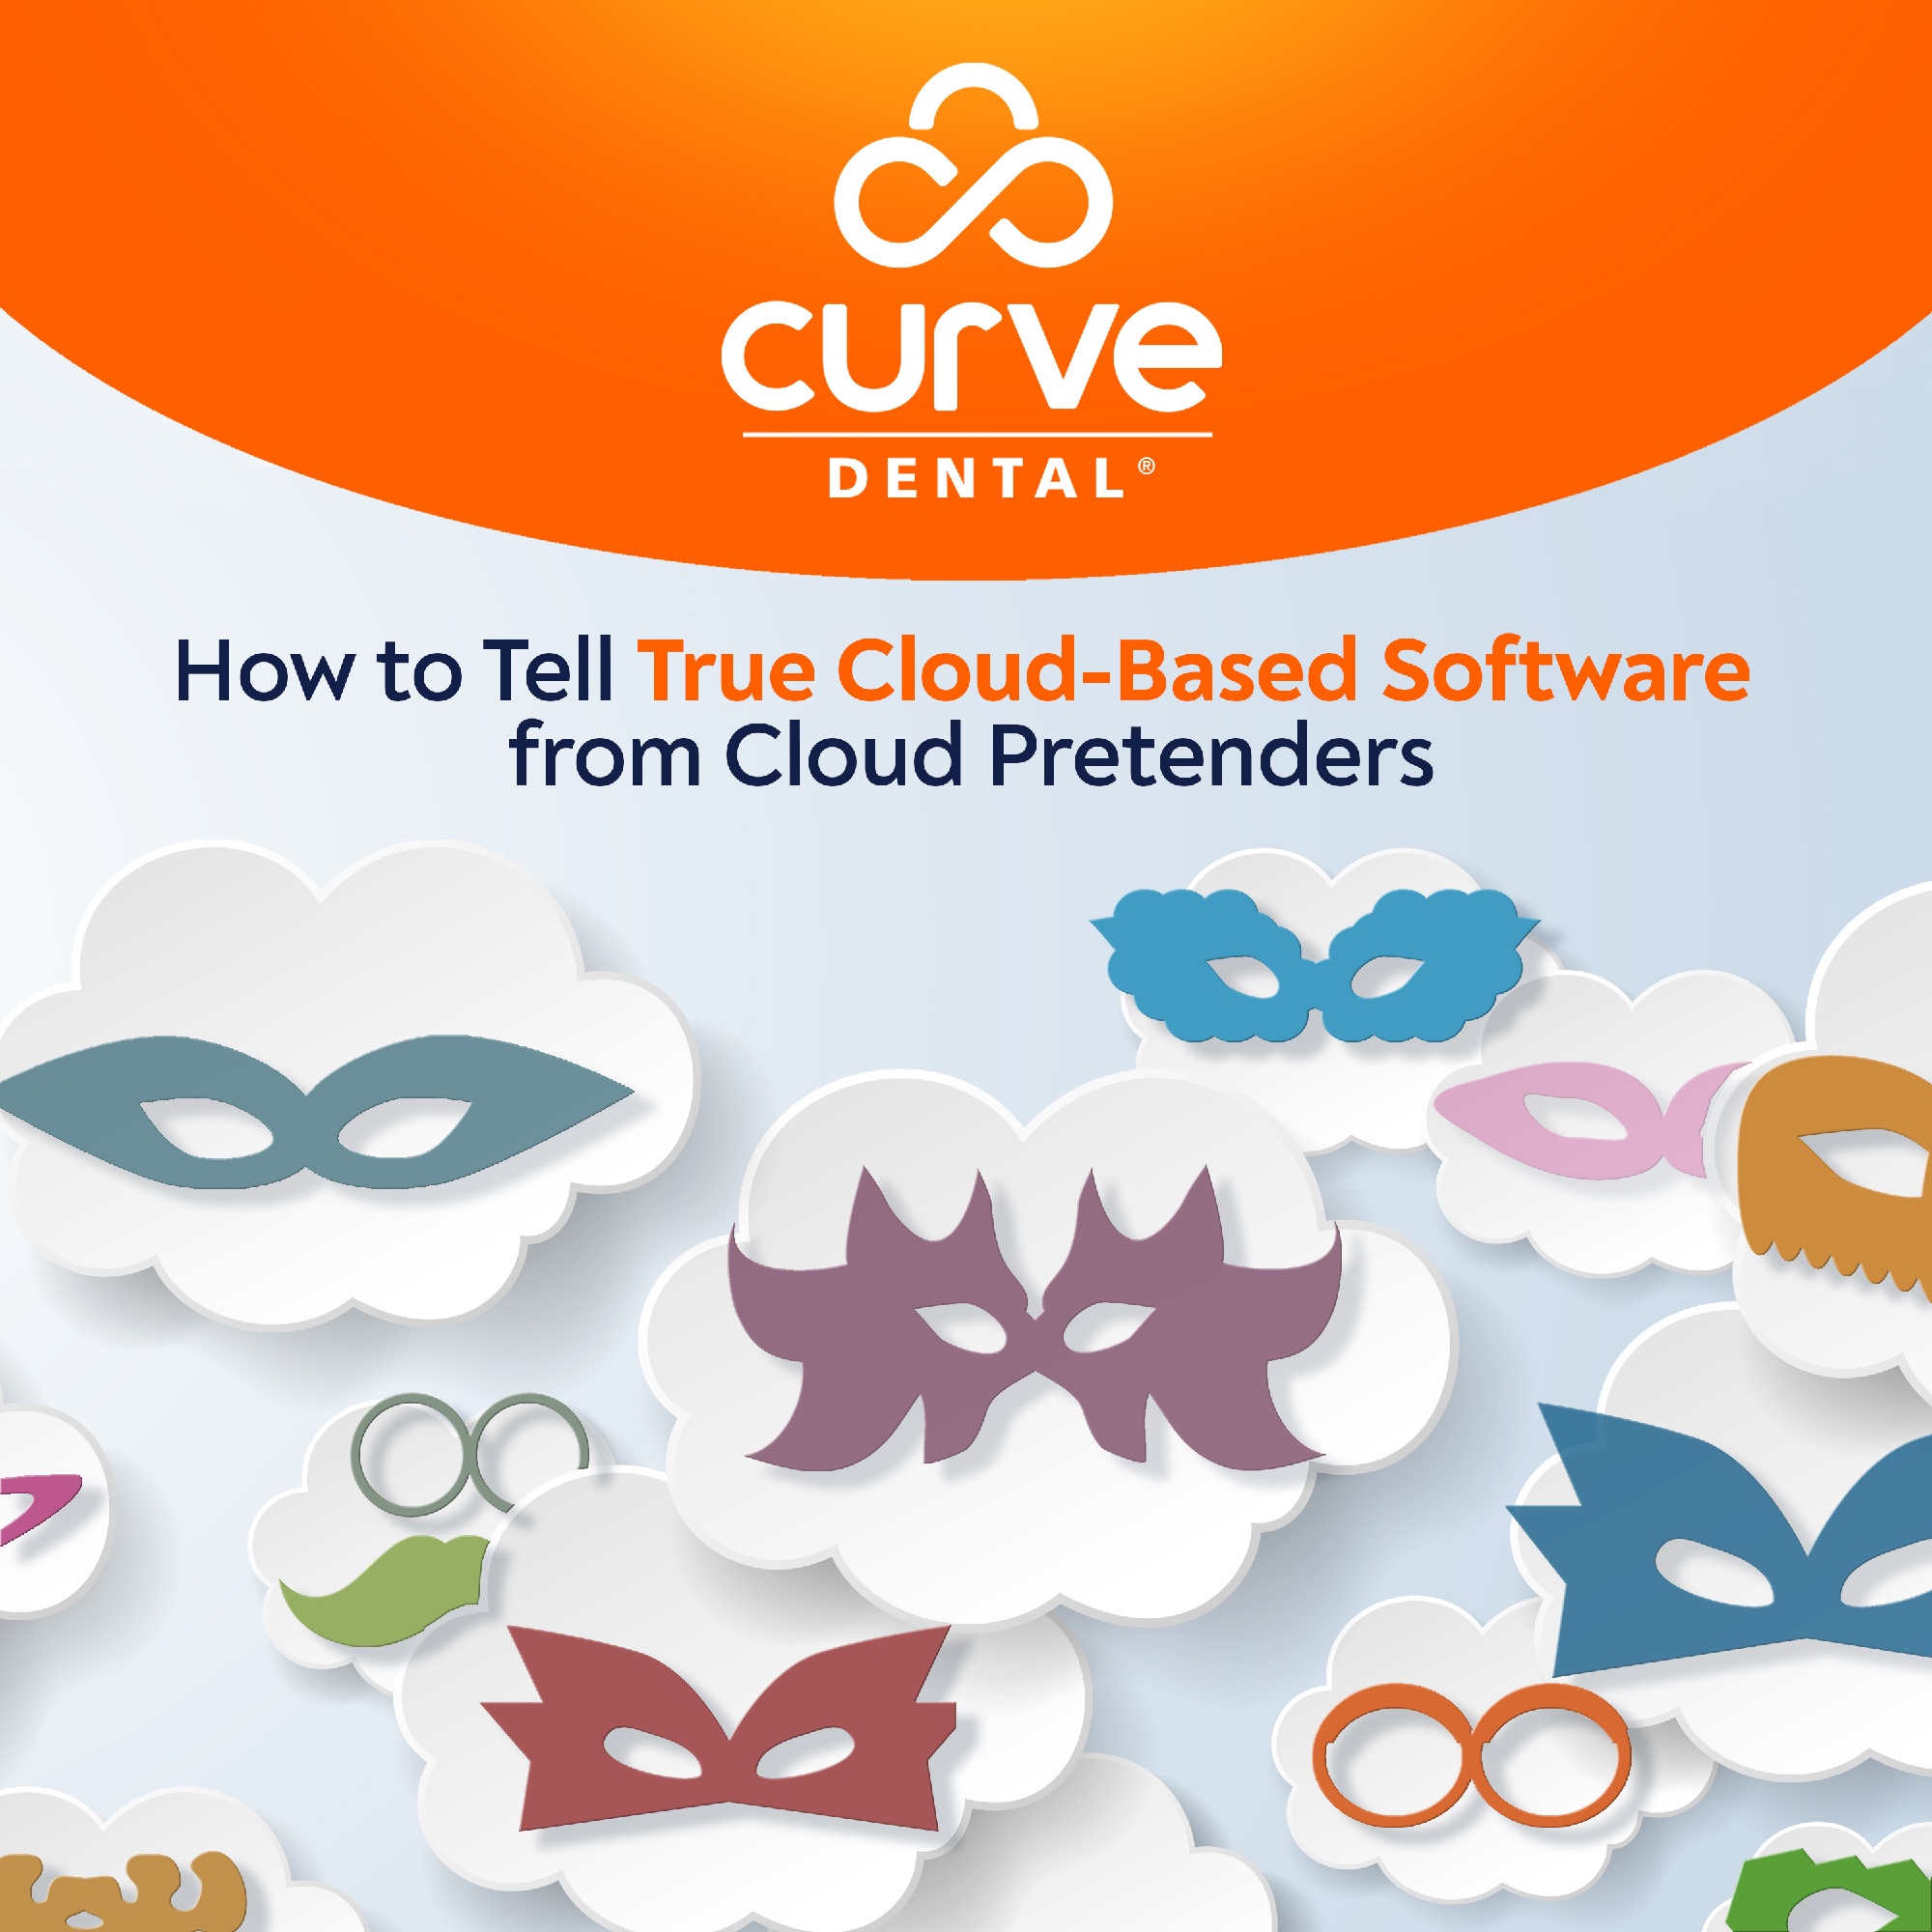 How to Tell True Cloud-Based Software from Cloud Pretenders